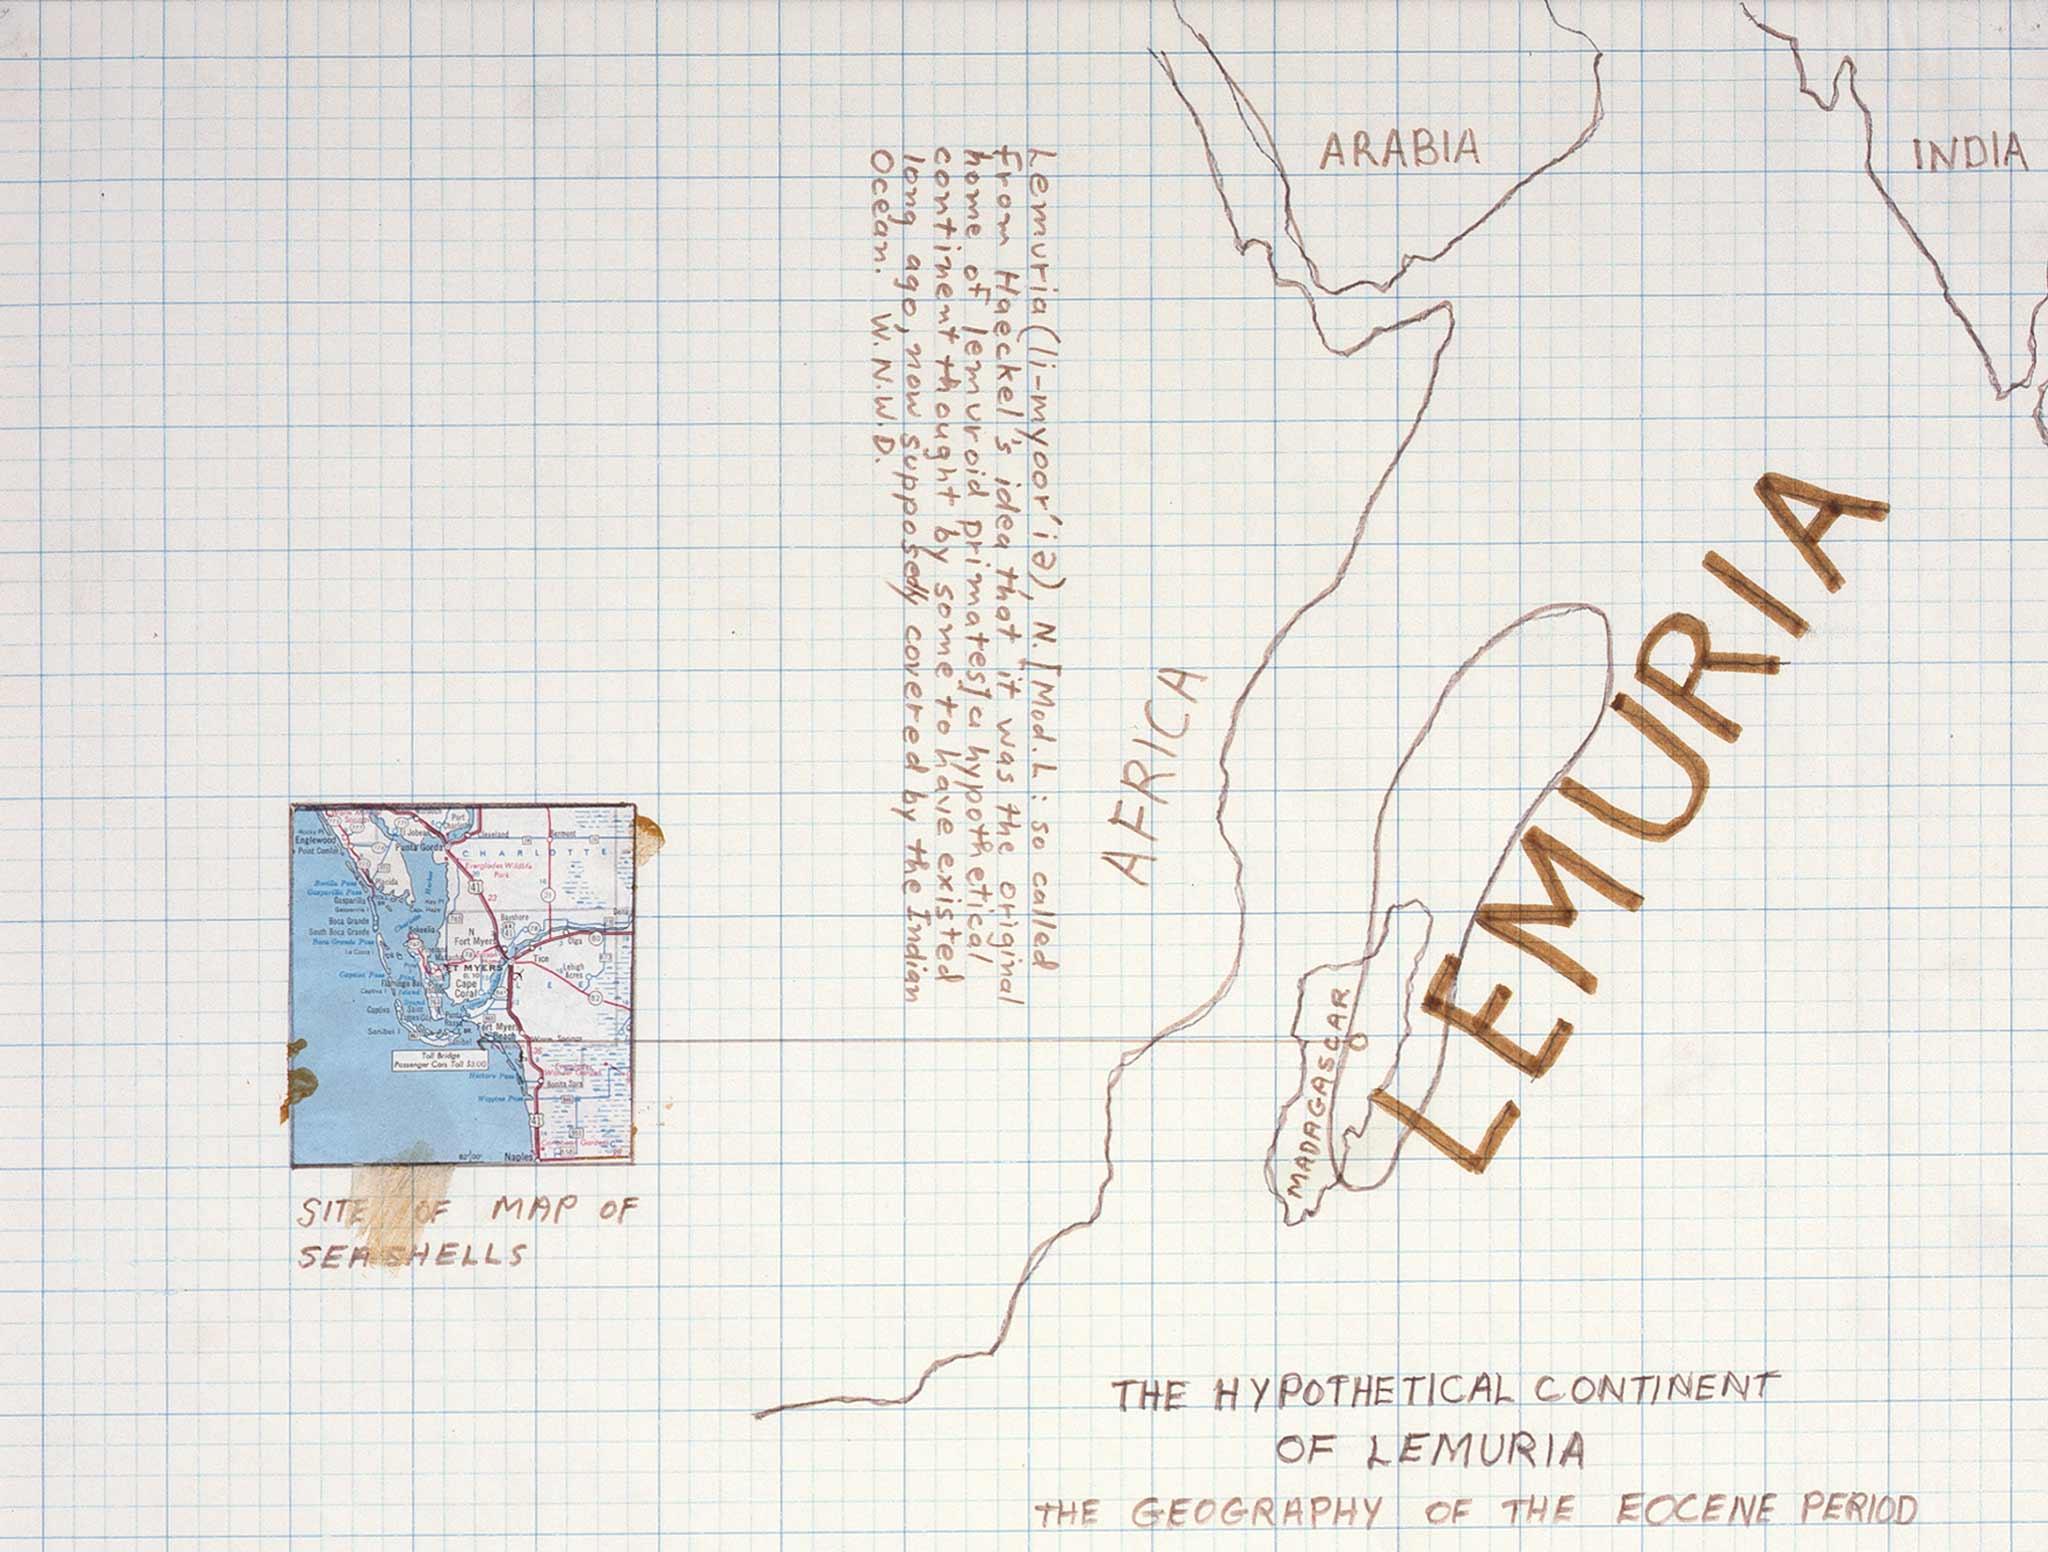 collage and drawing on graph paper depicting a theoretical continent of Lemuria, a map, and many handwritten notes